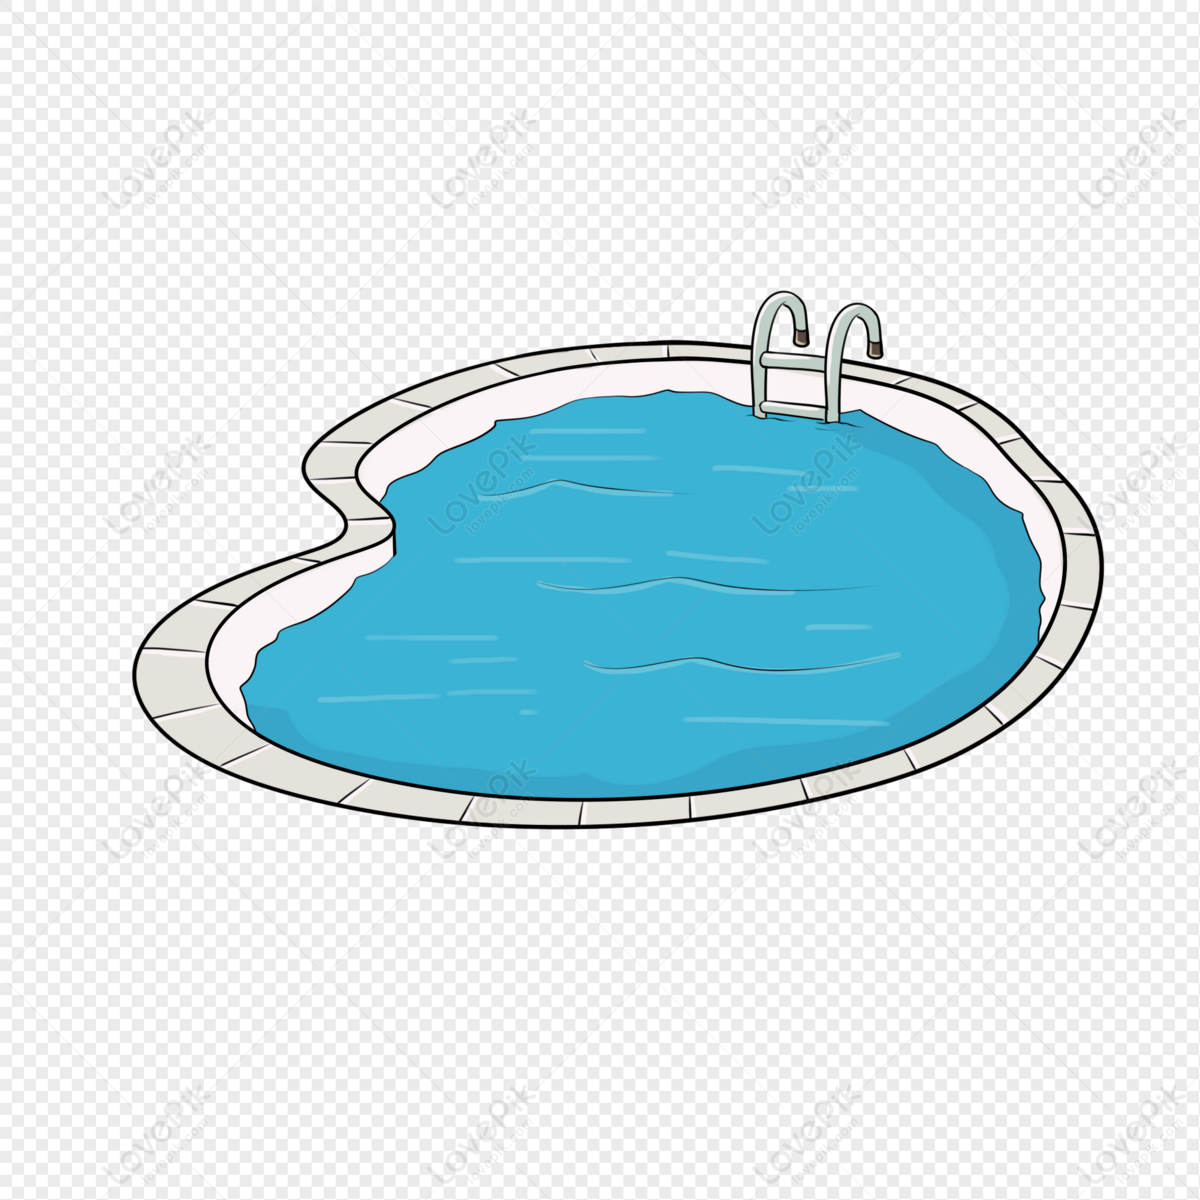 Summer Refreshing Swimming Pool Cartoon PNG Transparent Image And Clipart  Image For Free Download - Lovepik | 401197447